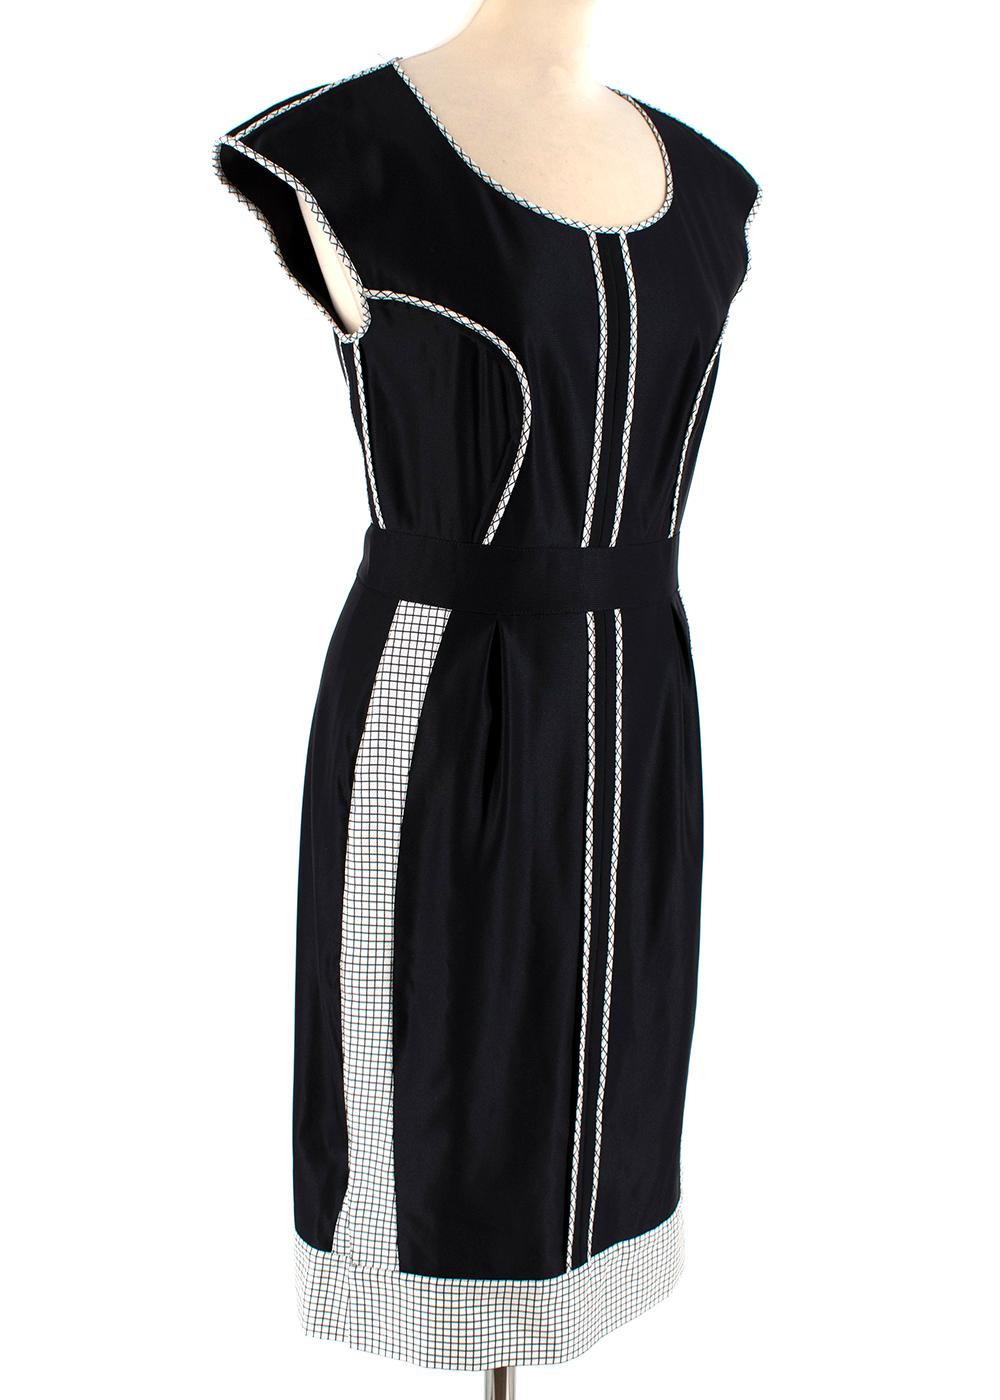 Fendi Black Diamond Piped Cap Sleeve Dress

Scoop Neck
Black and White Check piping on chest, trim and center of bodice
Check print on sides of skirt as well as the bottom cuff
Black waistband
Made in Italy
Dry-clean Only 

Measurements are taken